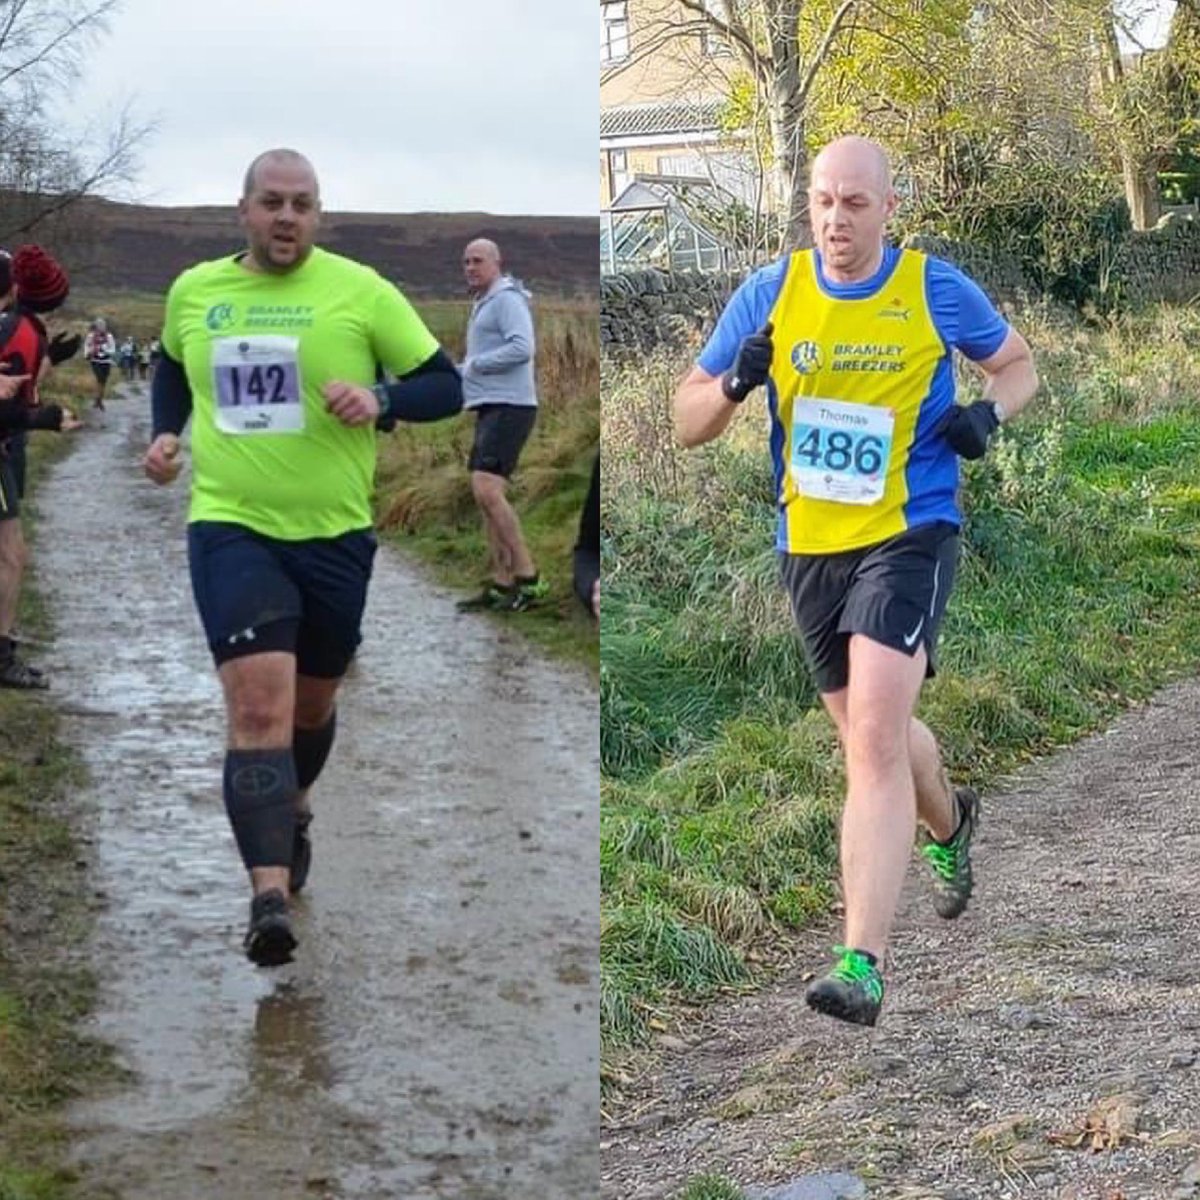 2019 to 2021 - same race at Baildon, 20 mins faster and over 5.5 stone lighter. Some achievement, lots of hard work and tough times. Keep smiling and plenty of positivity is the key #transformationthursdays #throwback #health #mind #body #walking #running #weightloss #goals